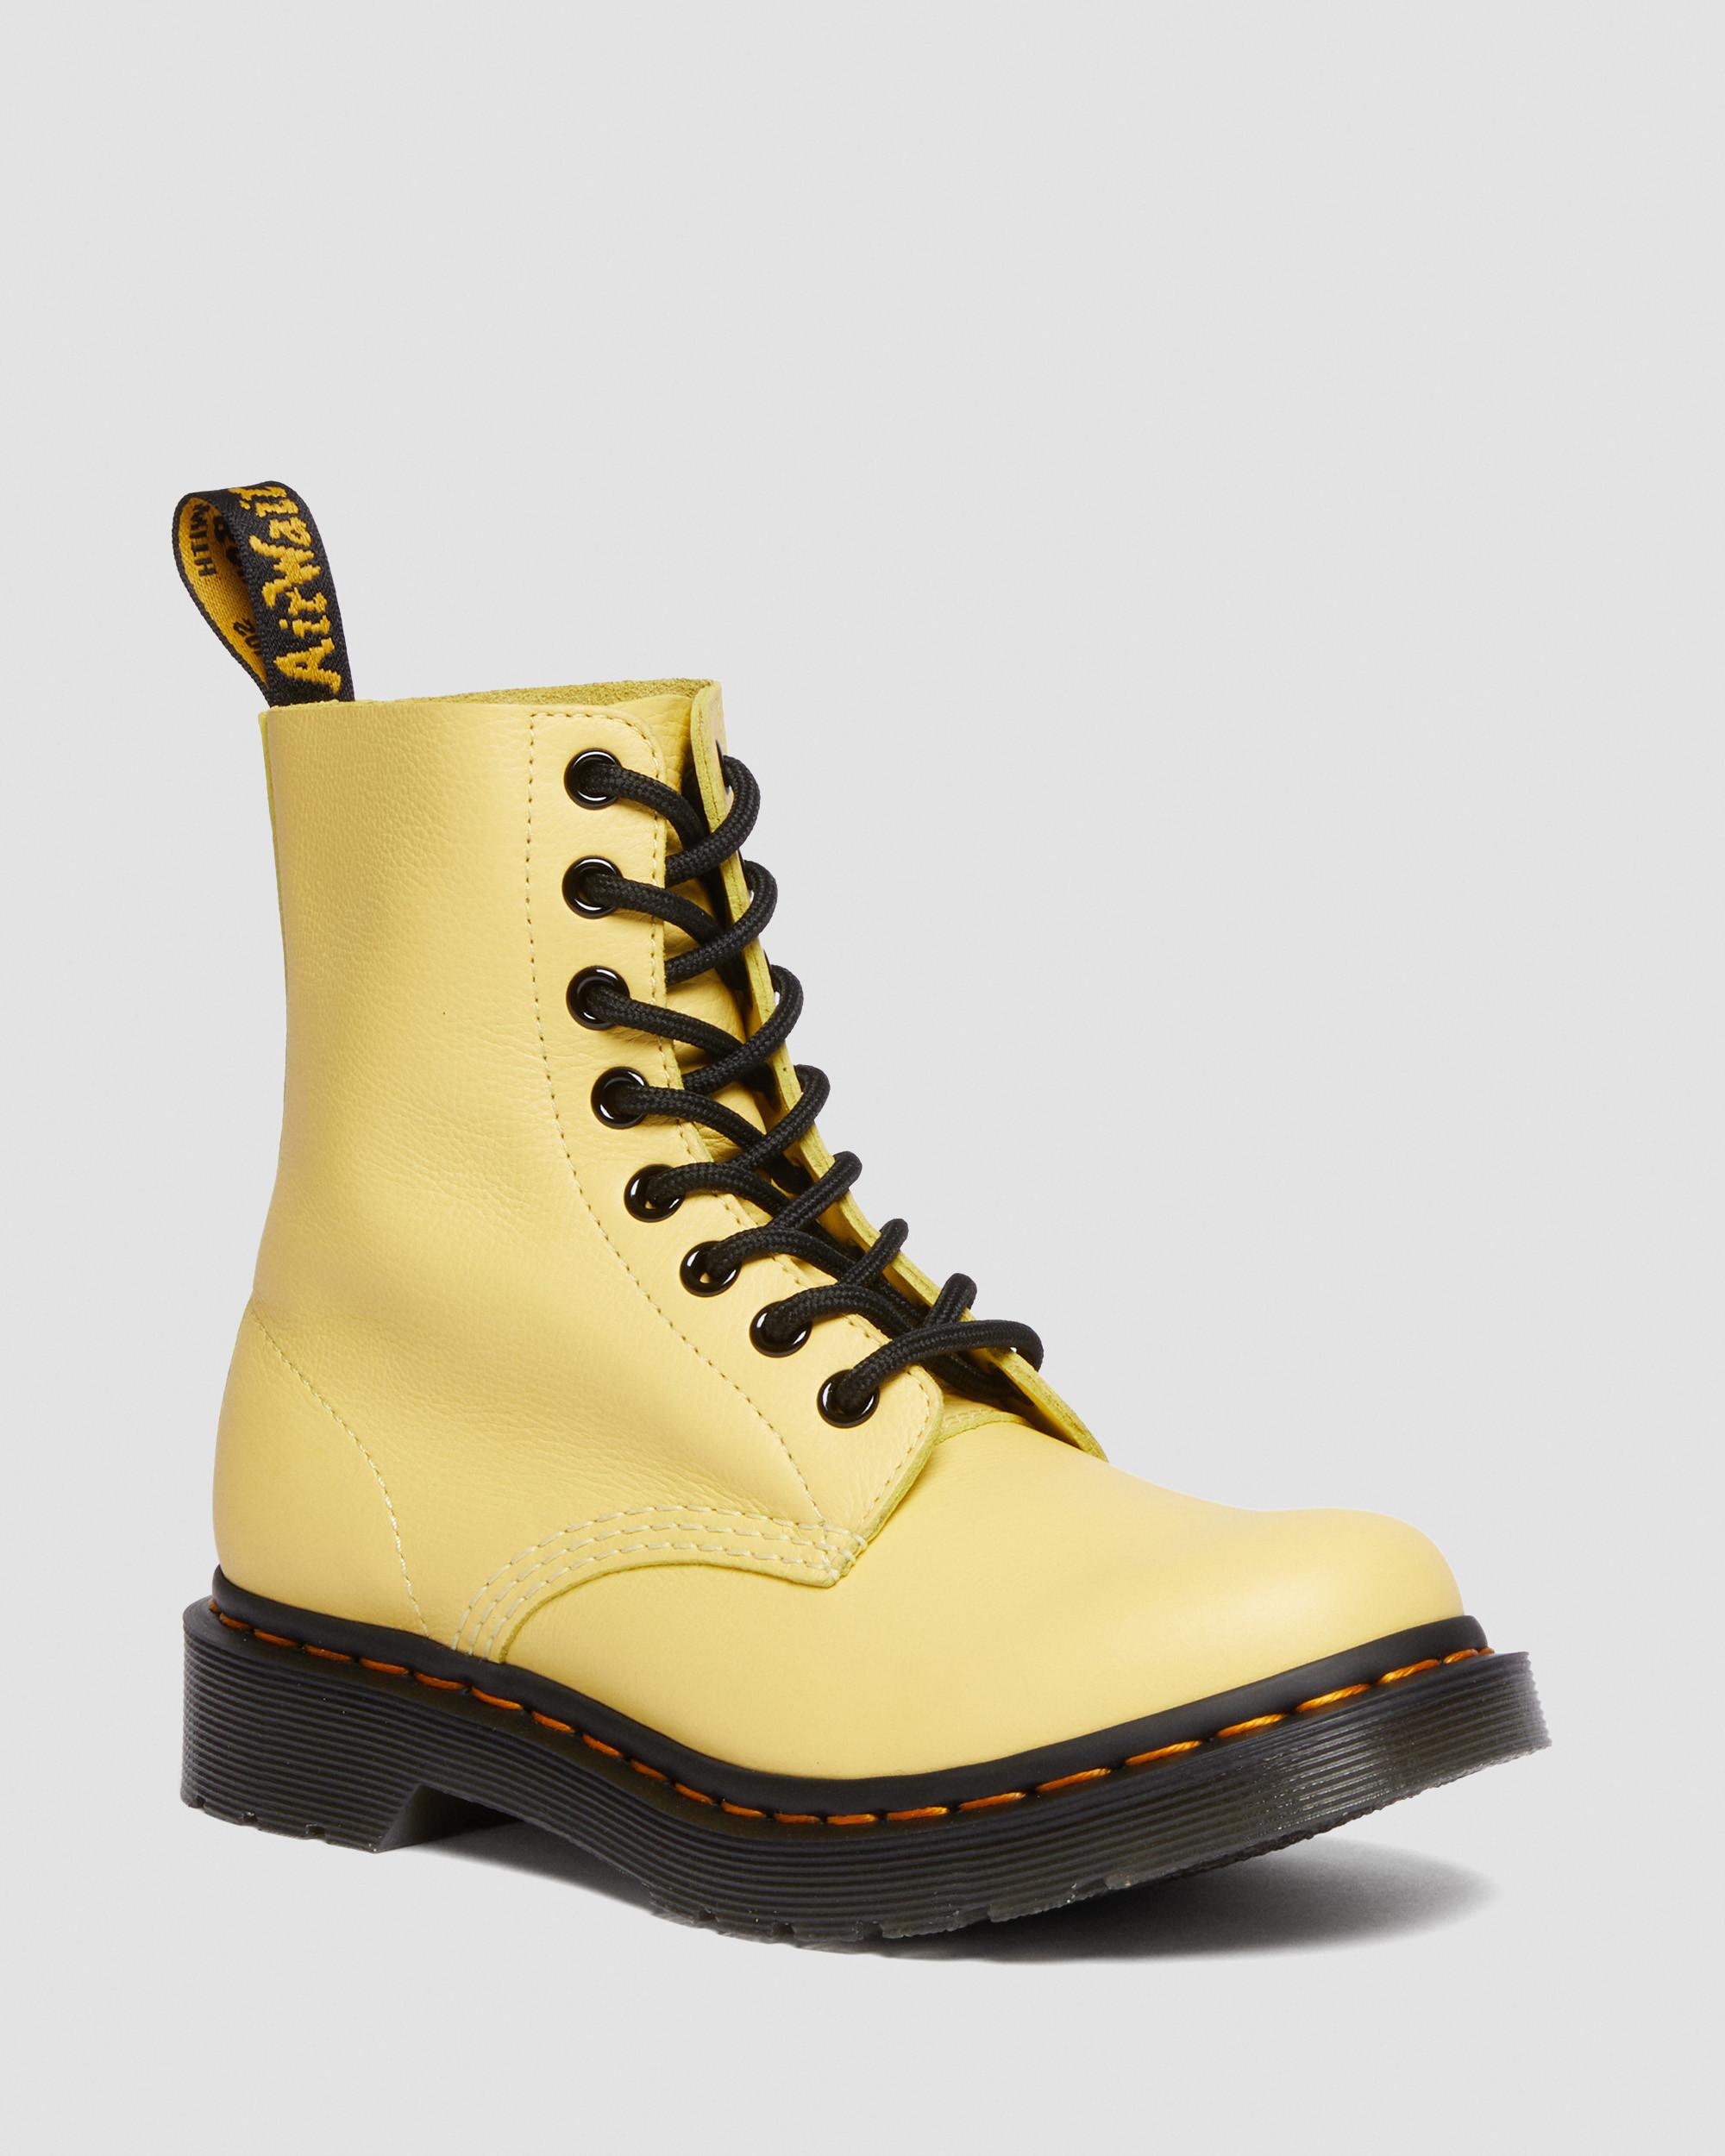 1460 Women's Pascal Black Eyelet Lace Up Boots in Lemon Yellow